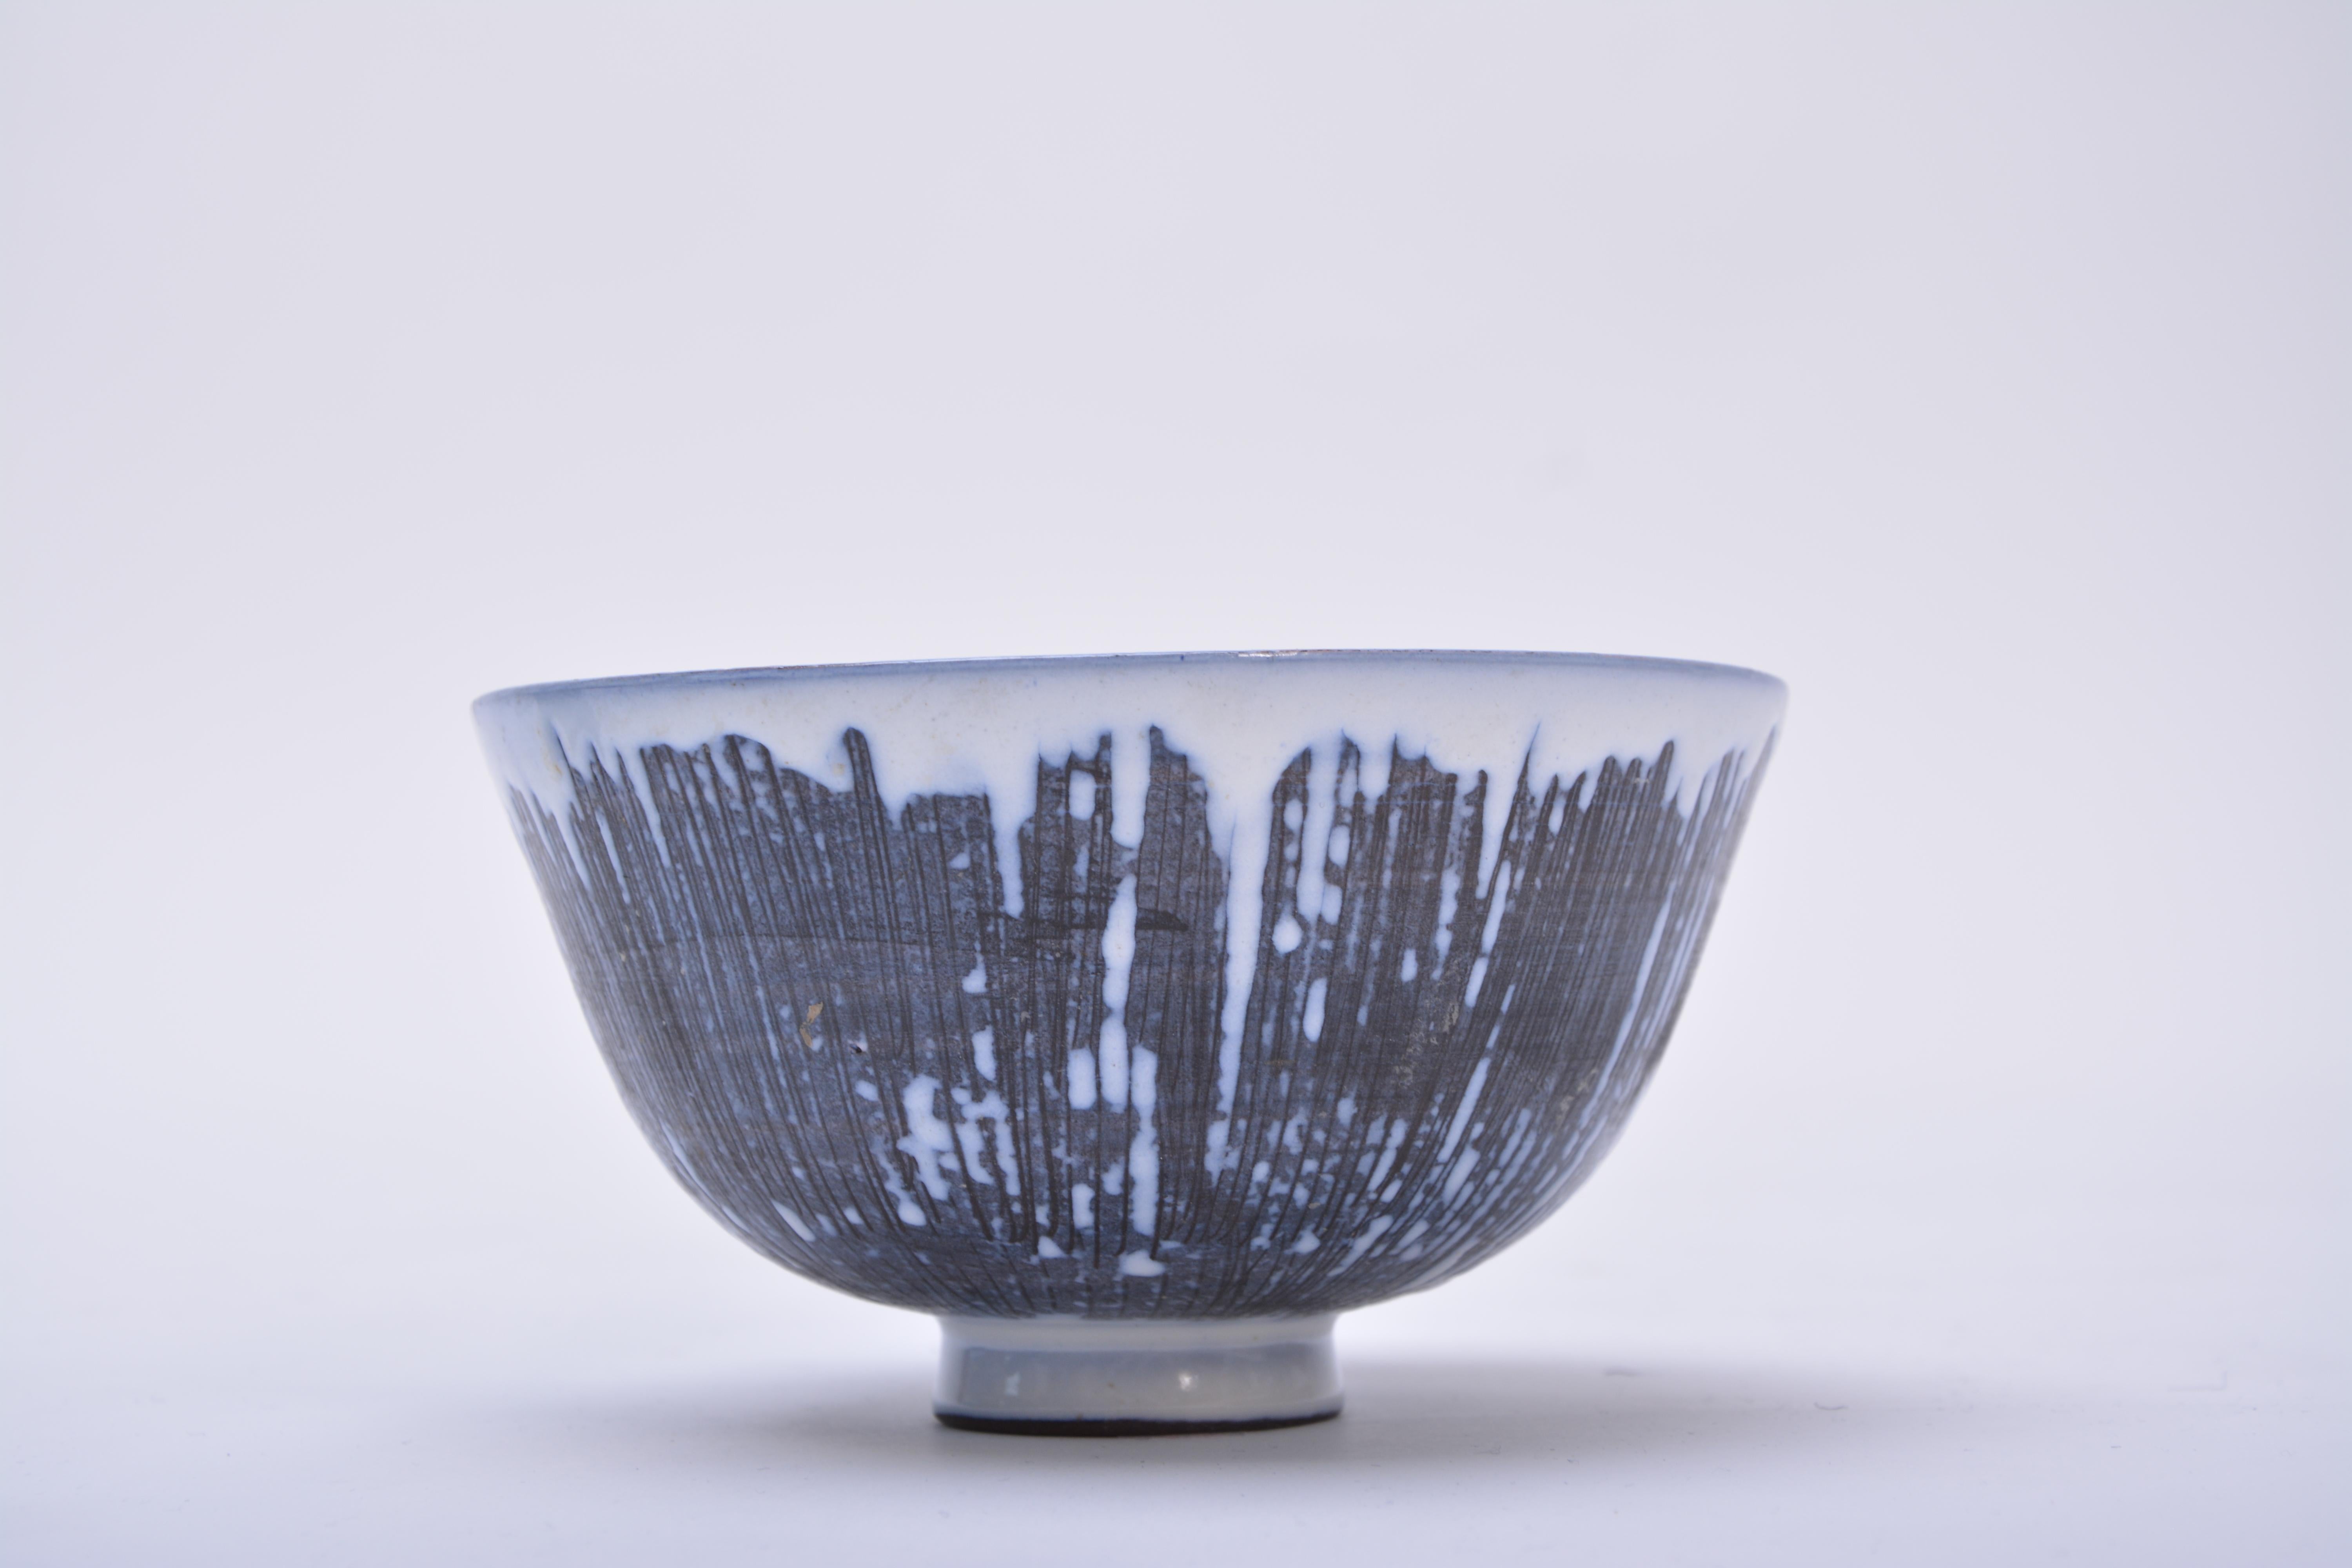 A handmade Swedish Mid-Century Modern ceramic bowl with green, blue, brown, and dark grey glaze creating a geometric pattern. Exterior of the bowl has been decorated with the sgraffito technique that consists of fine lines carved into the background